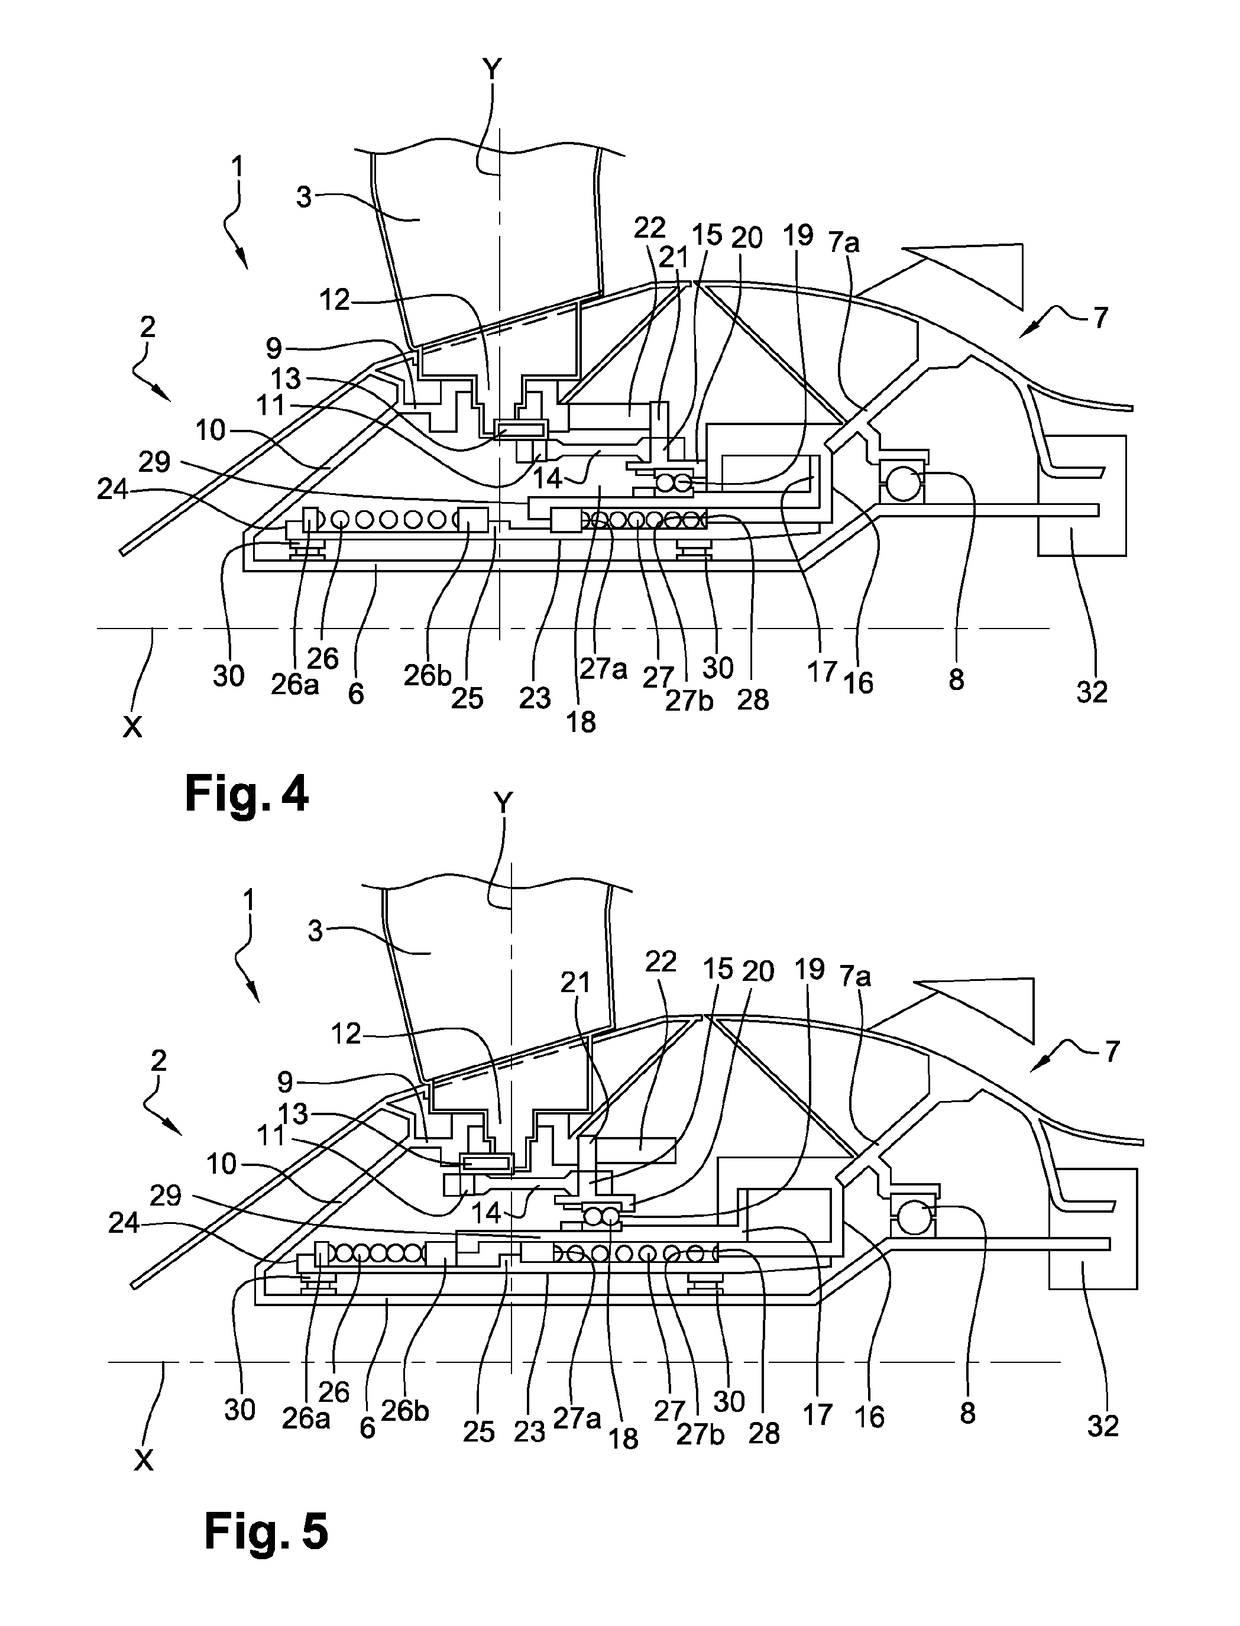 Fan module with variable-pitch blades for a turbine engine